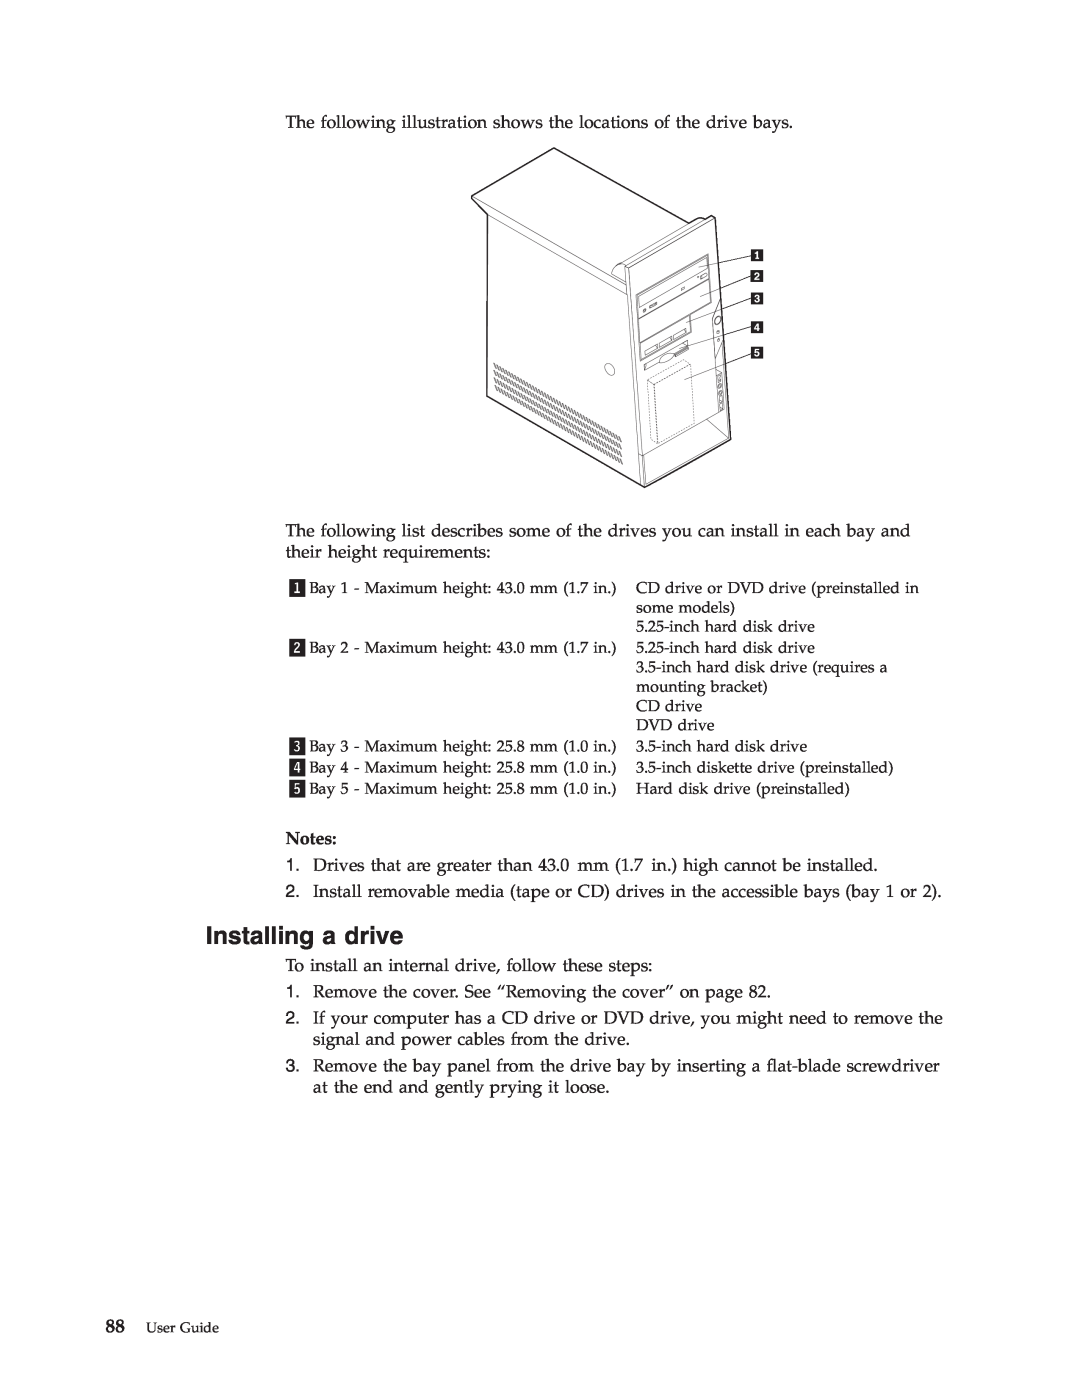 IBM 8190, 8128, 8185, 8189, 8186, 8187, 8188 manual Installing a drive, User Guide 